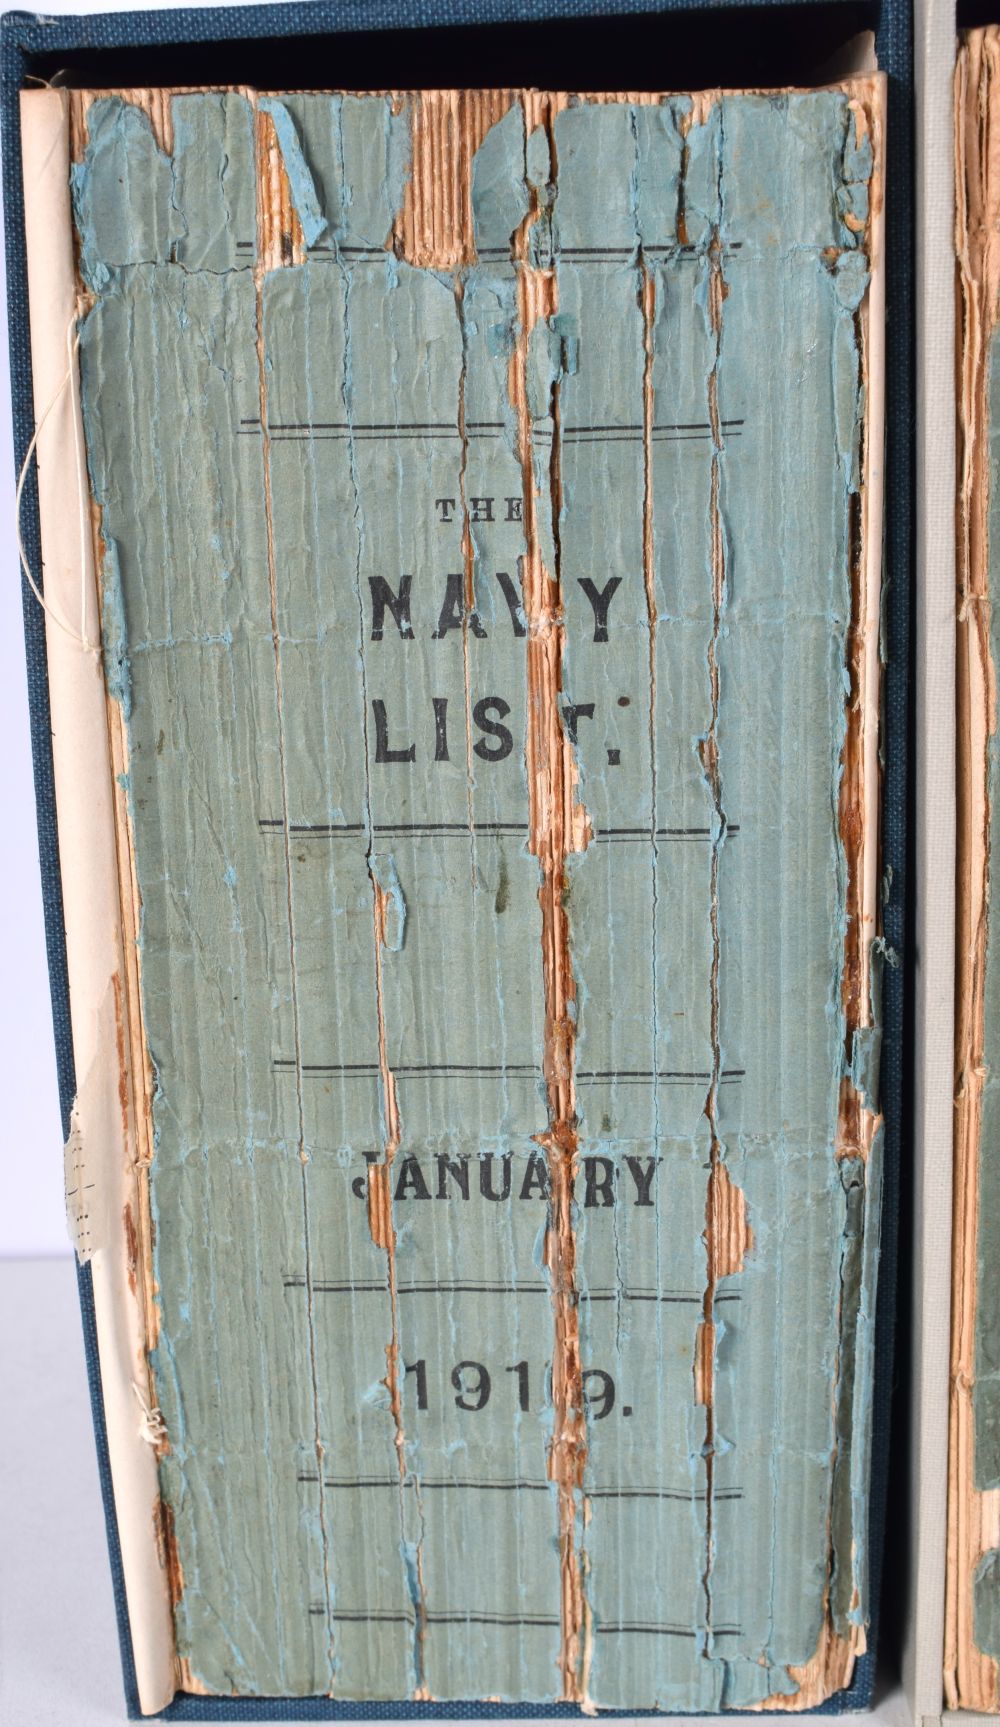 A collection of books related to "The Navy list " post WWall 1 1919-1921. (4). - Image 6 of 8